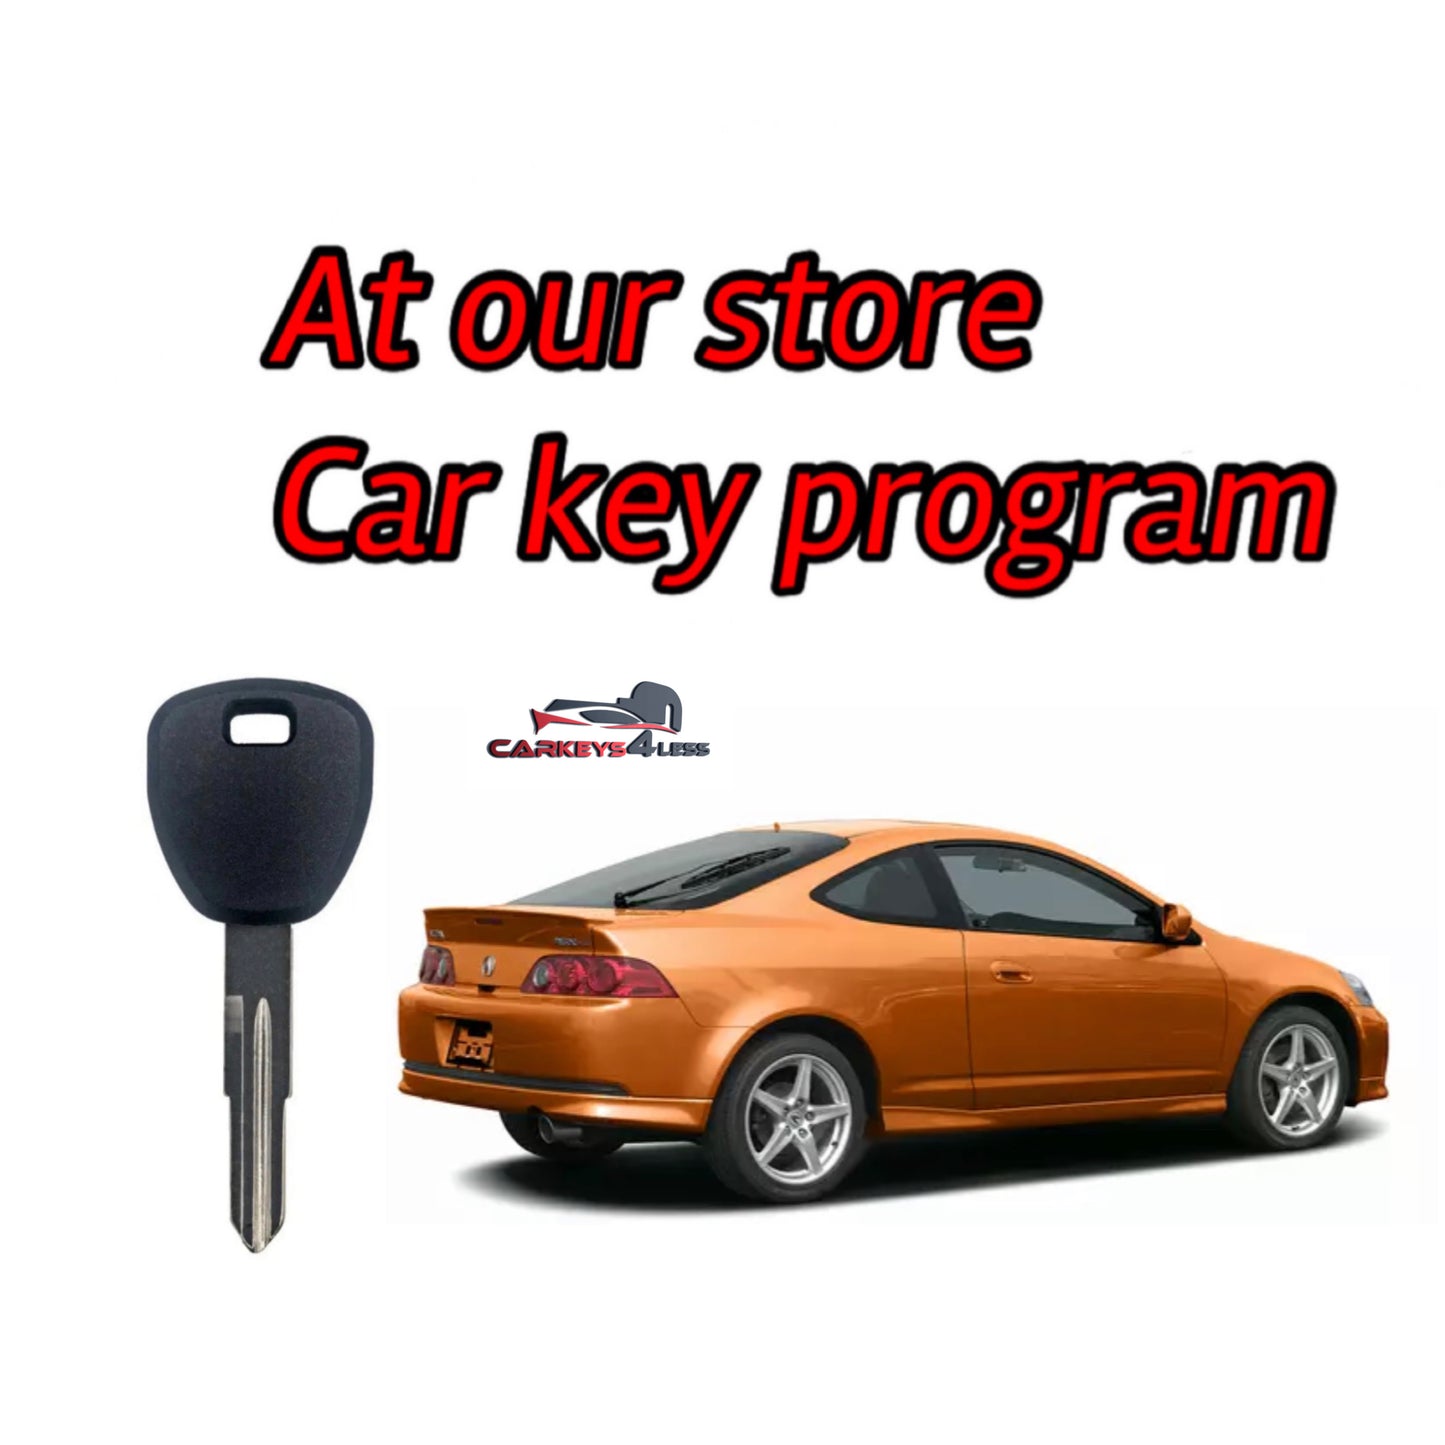 At our store spare key programming for honda/acura